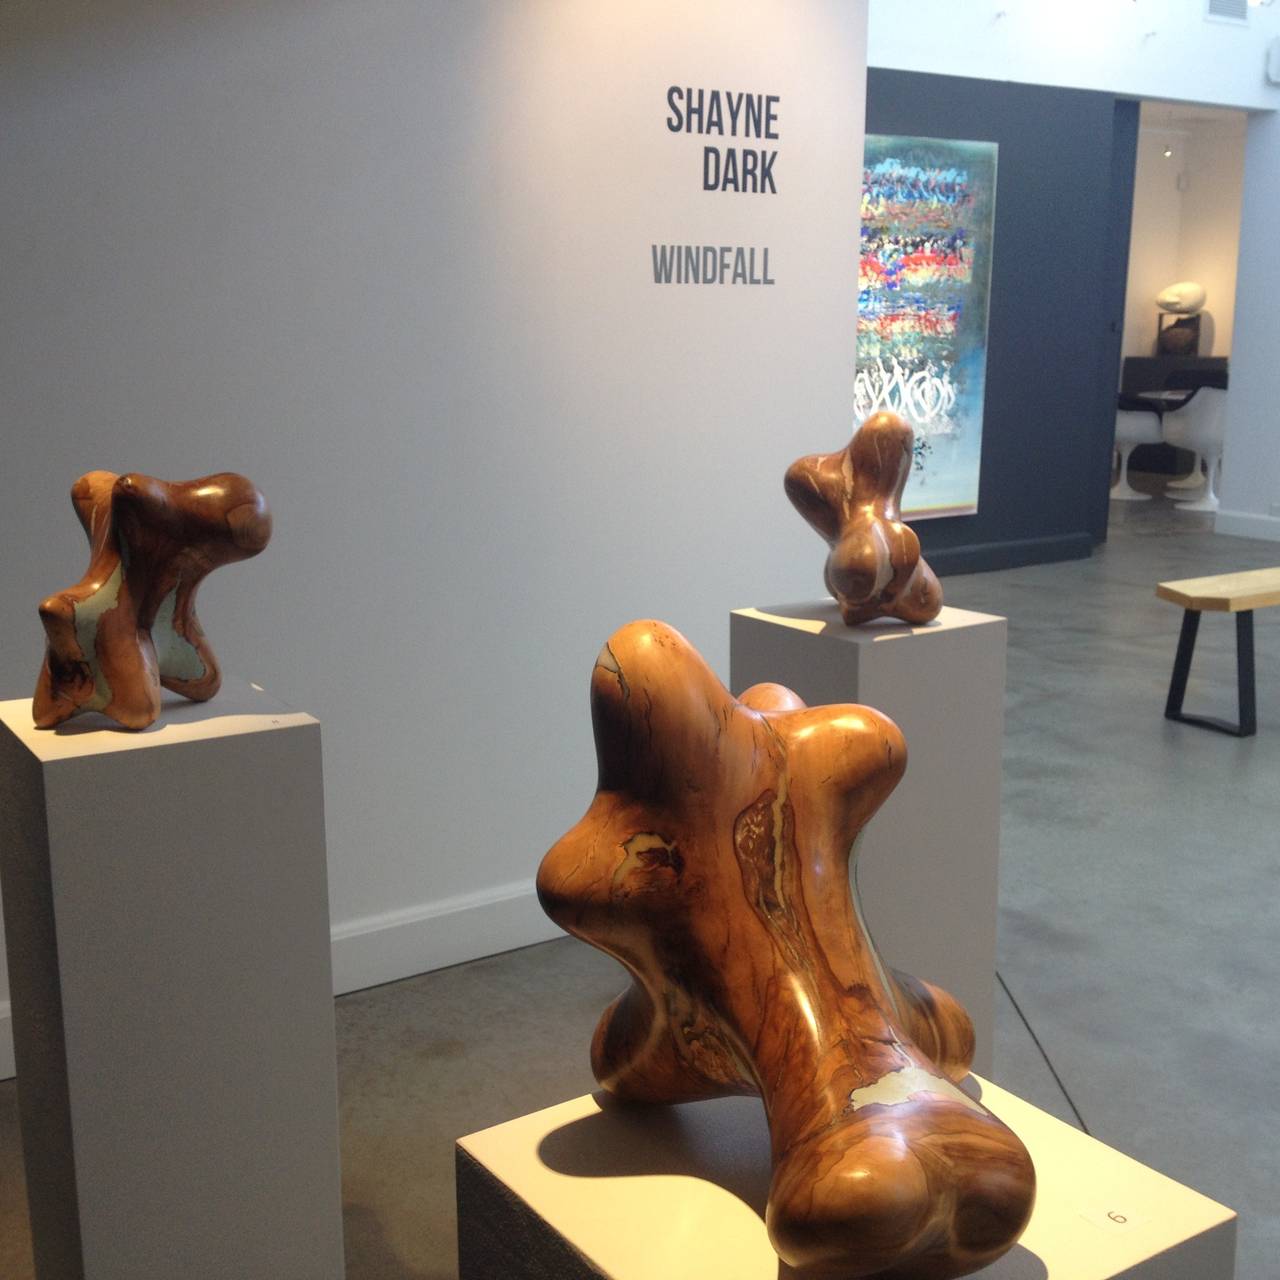 This series of eight abstract sculptures by Shayne Dark is made from applewood burls collected from apple orchards in Prince Edward County. 